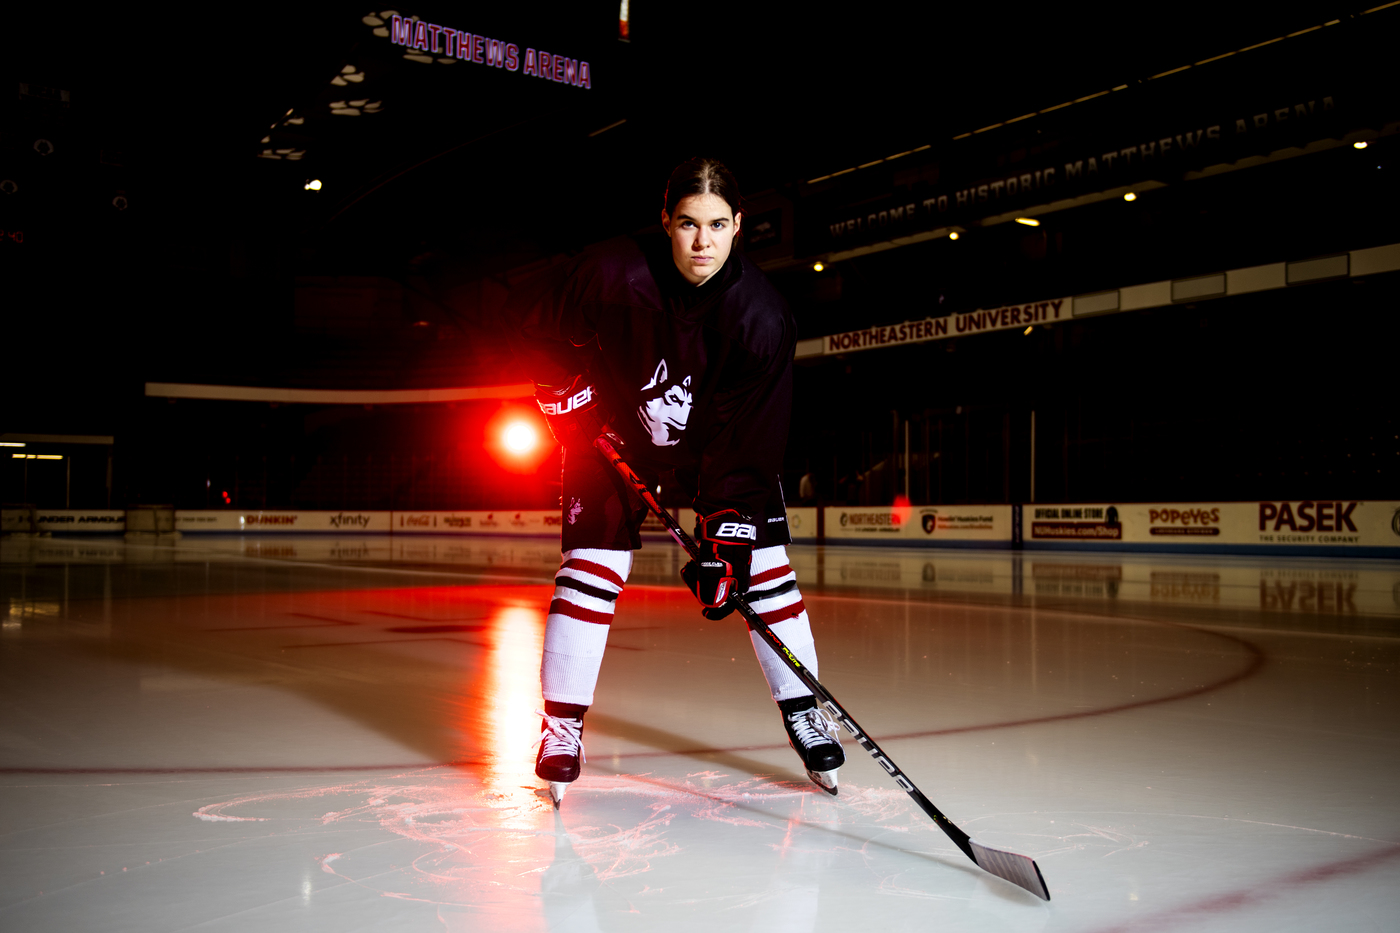 Women’s hockey player Alina Mueller poses for a portrait at Matthews Arena.